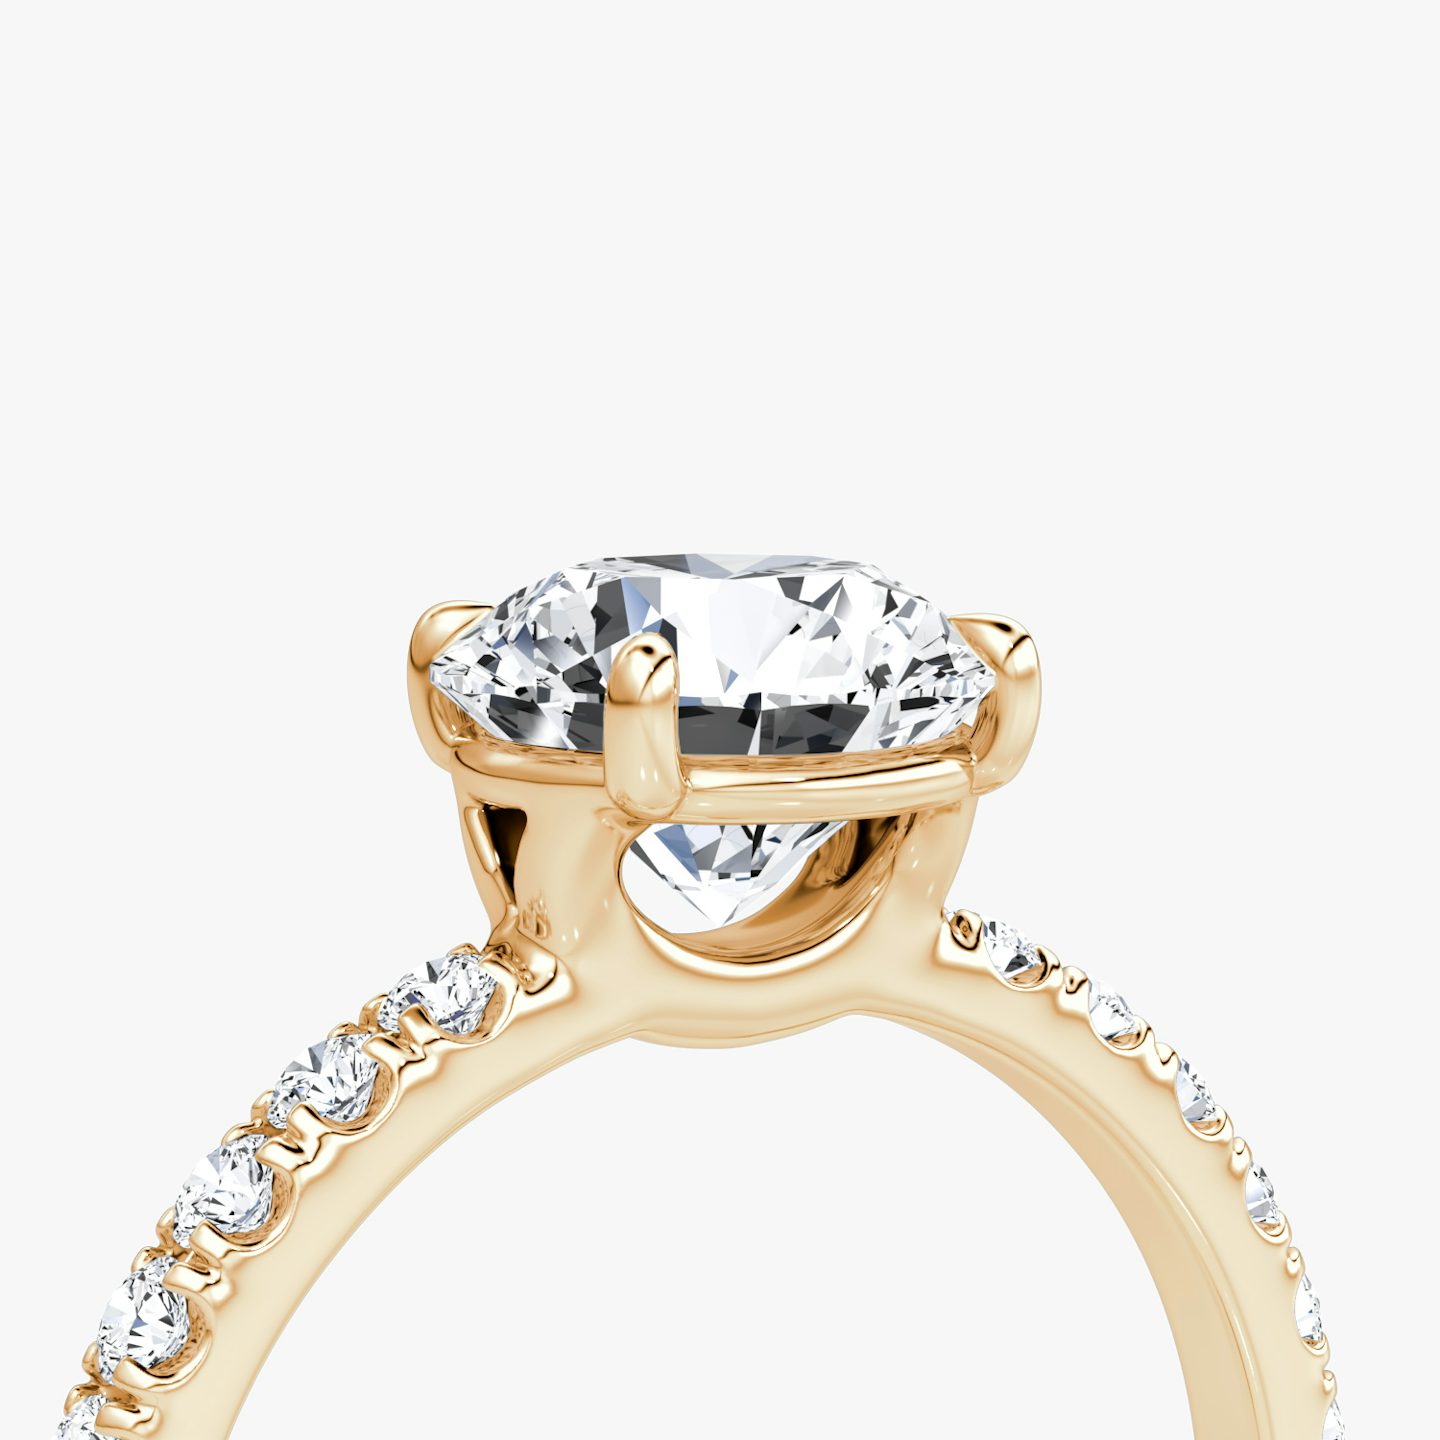 The Signature | Round Brilliant | 14k | 14k Rose Gold | Band width: Large | Band: Pavé | Setting style: Plain | Carat weight: 1 | Diamond orientation: vertical